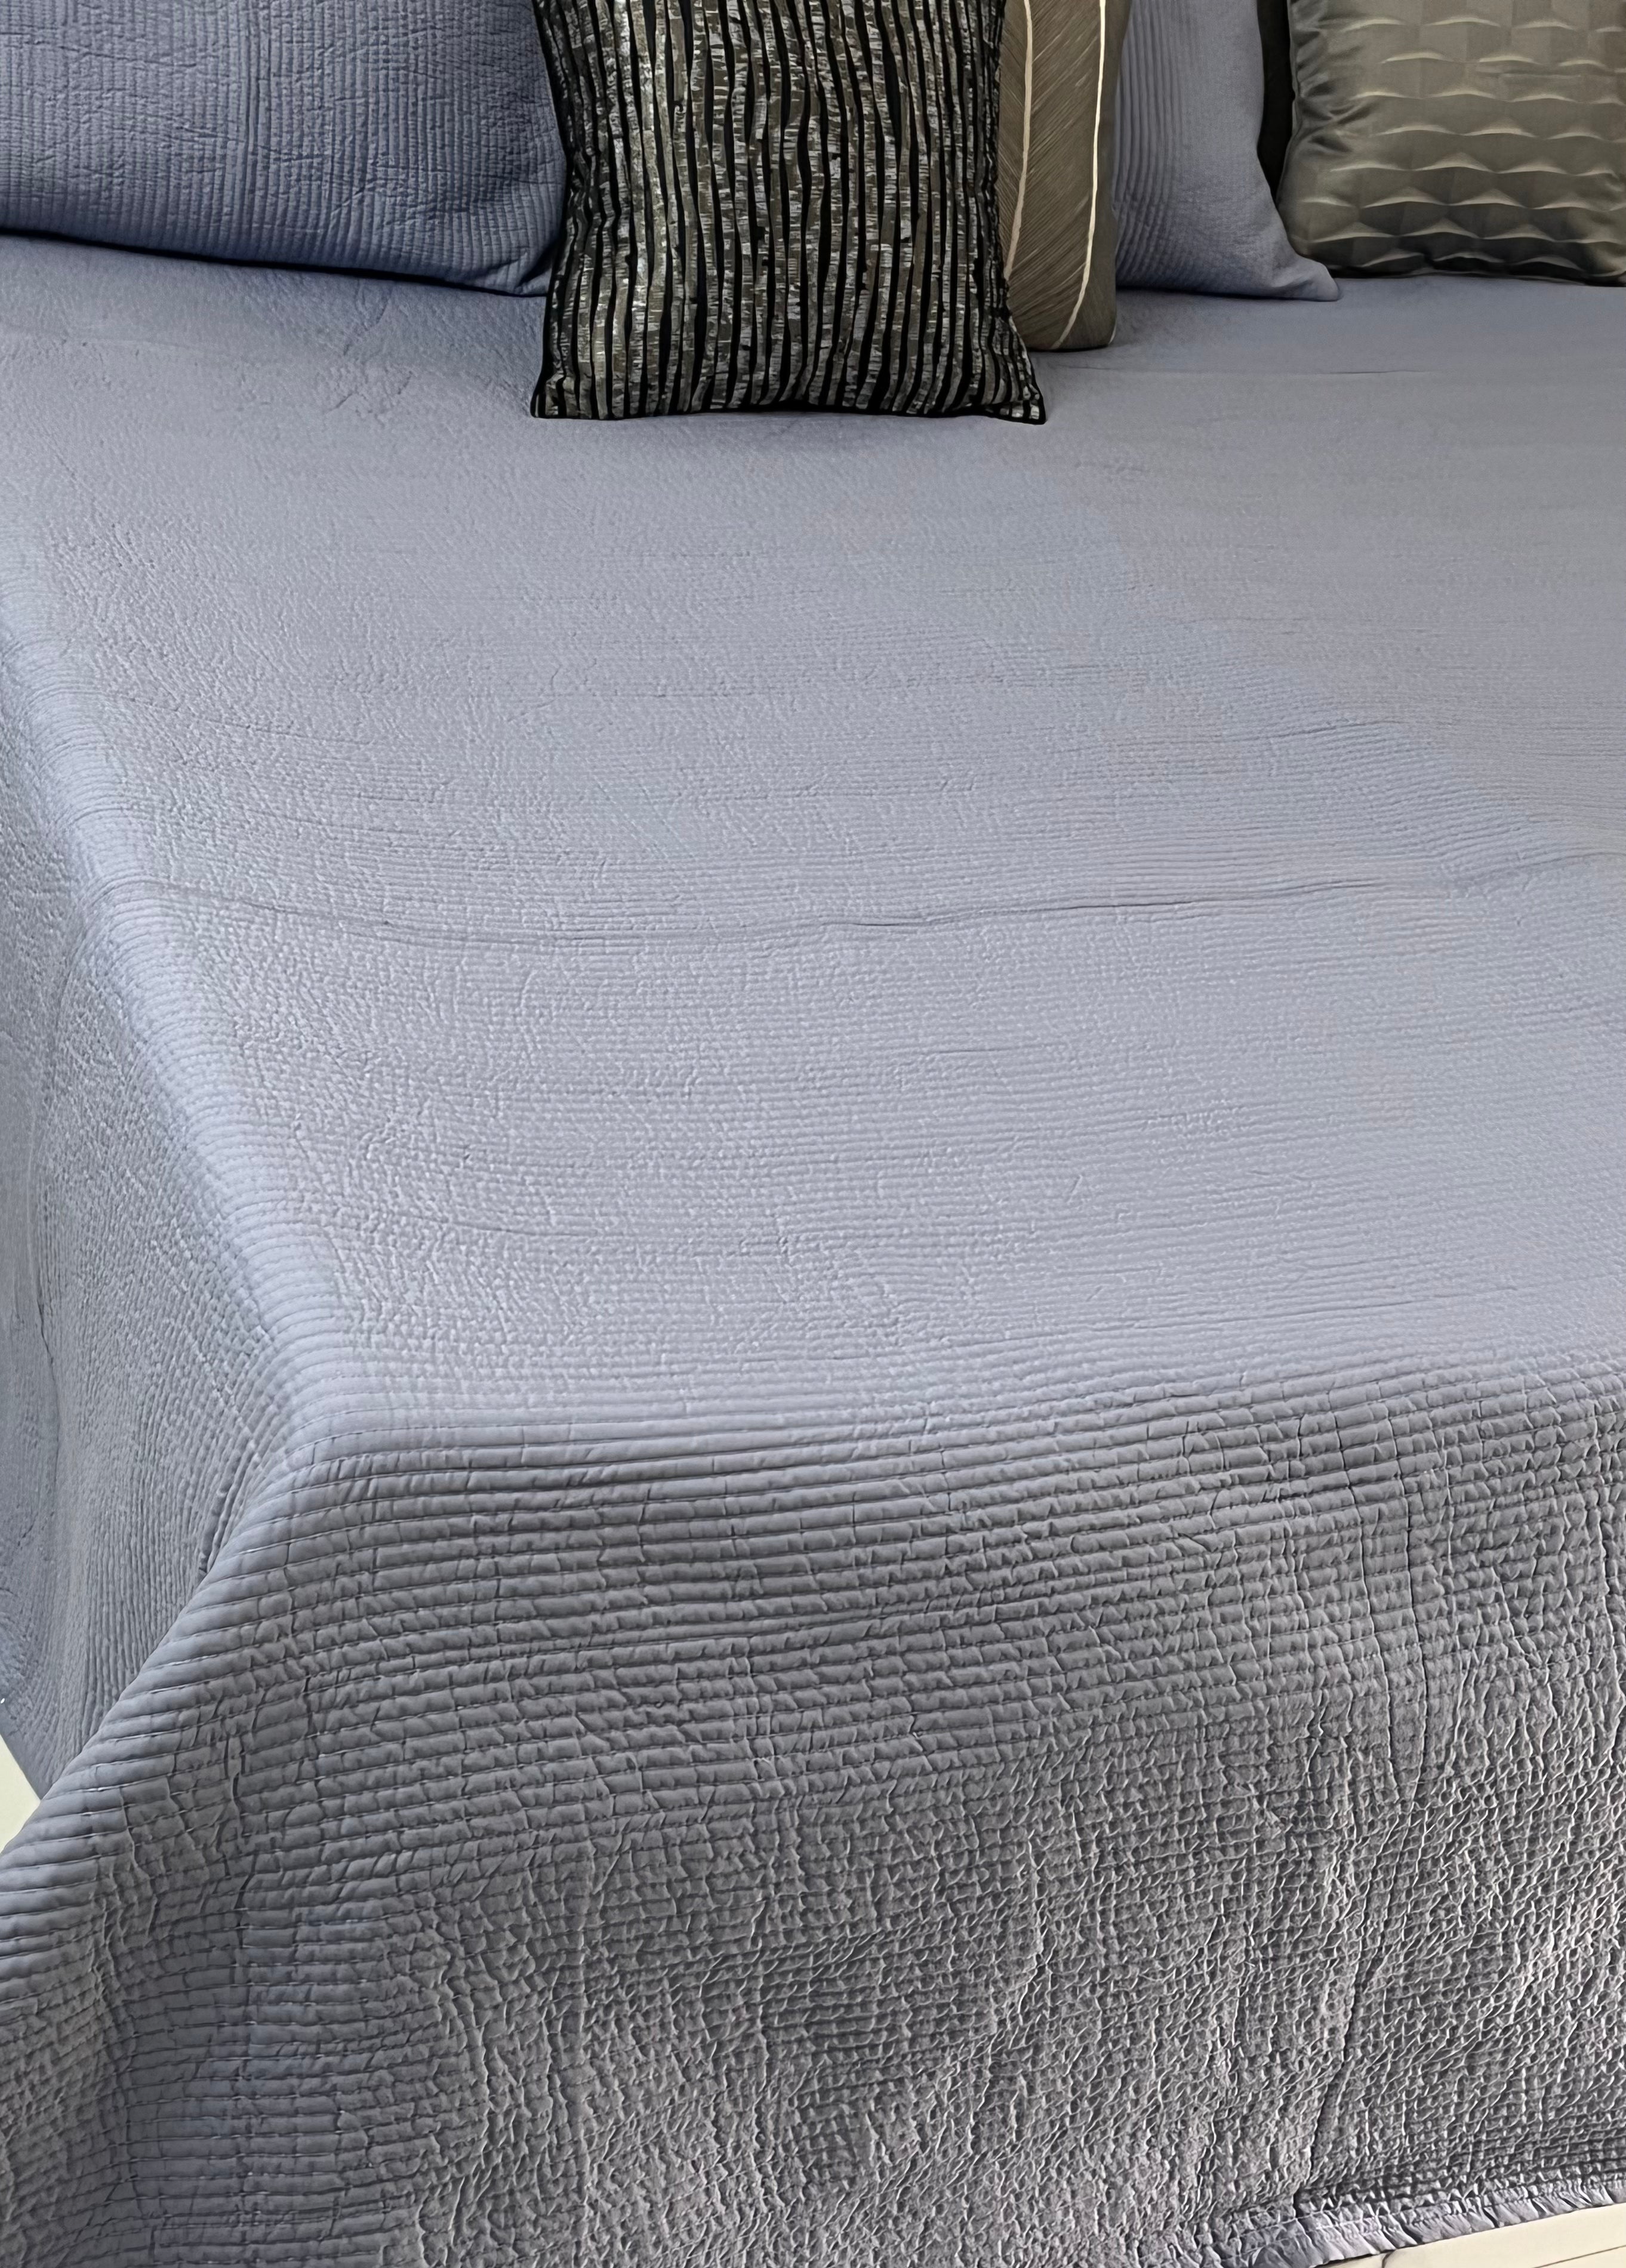 Grey Super King Size 100% Pure Cotton Luxurious Quilted Bedspread 108x108 Inches